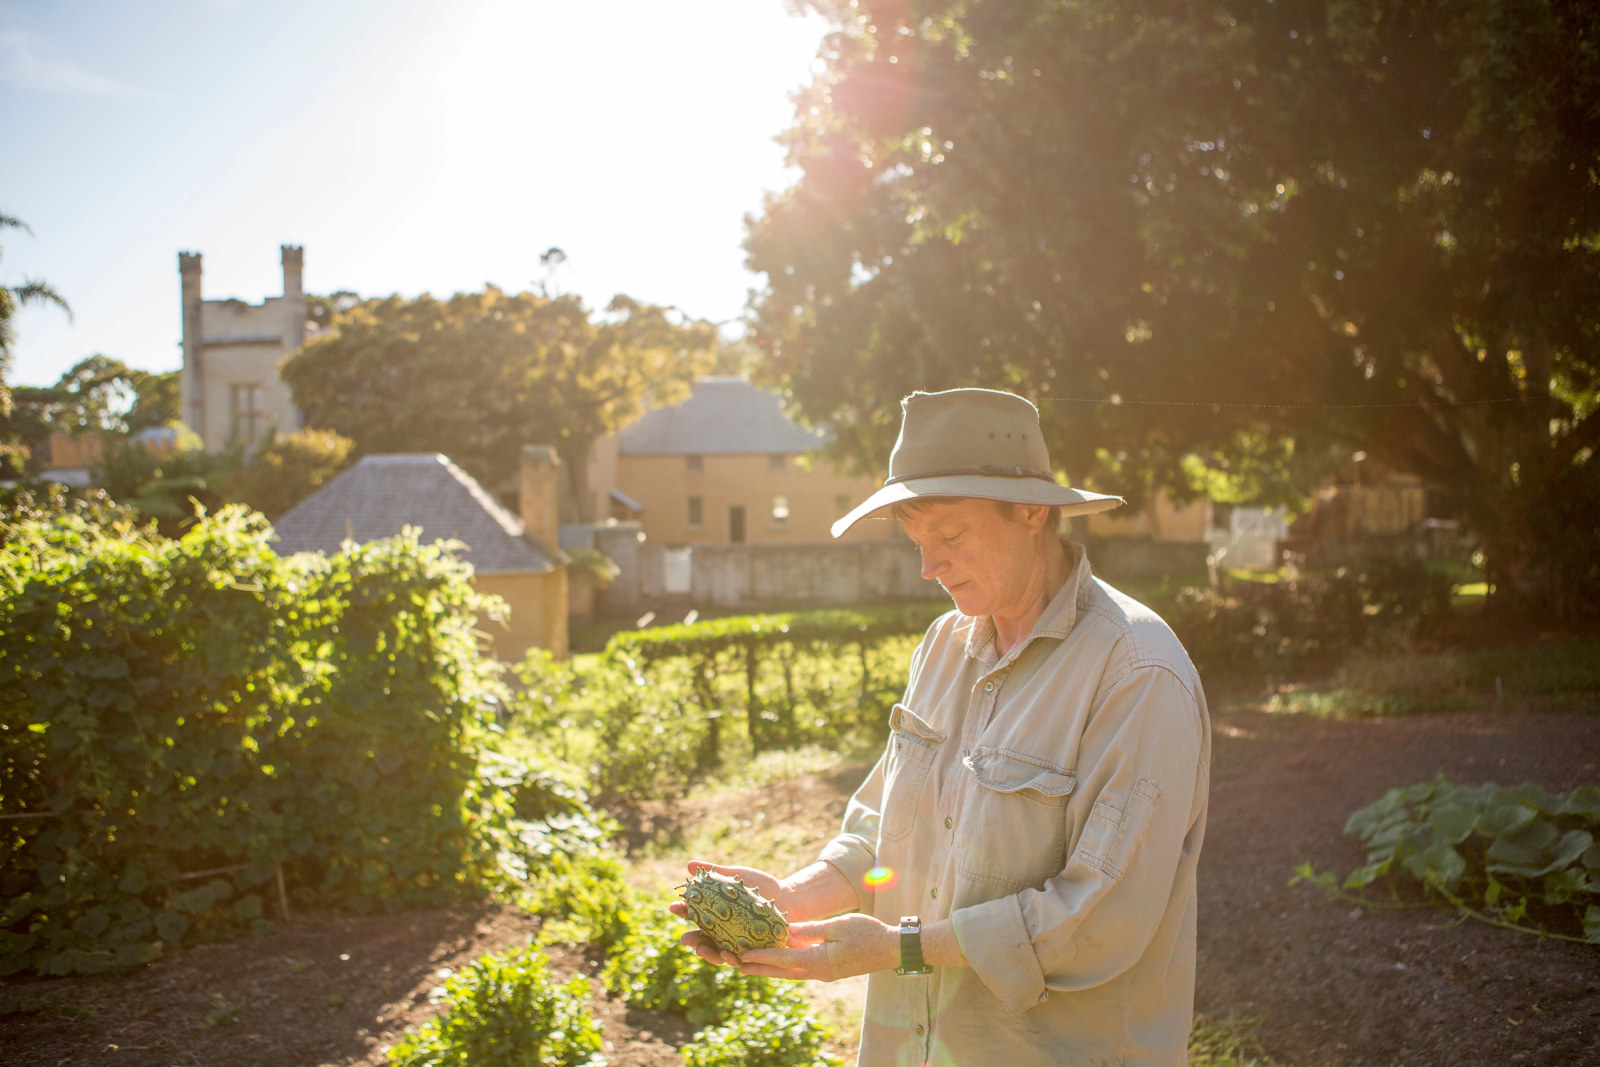 A woman (Anita Rayner) inspects a piece of fruit in the VH kitchen garden. The house can be seen in the background.